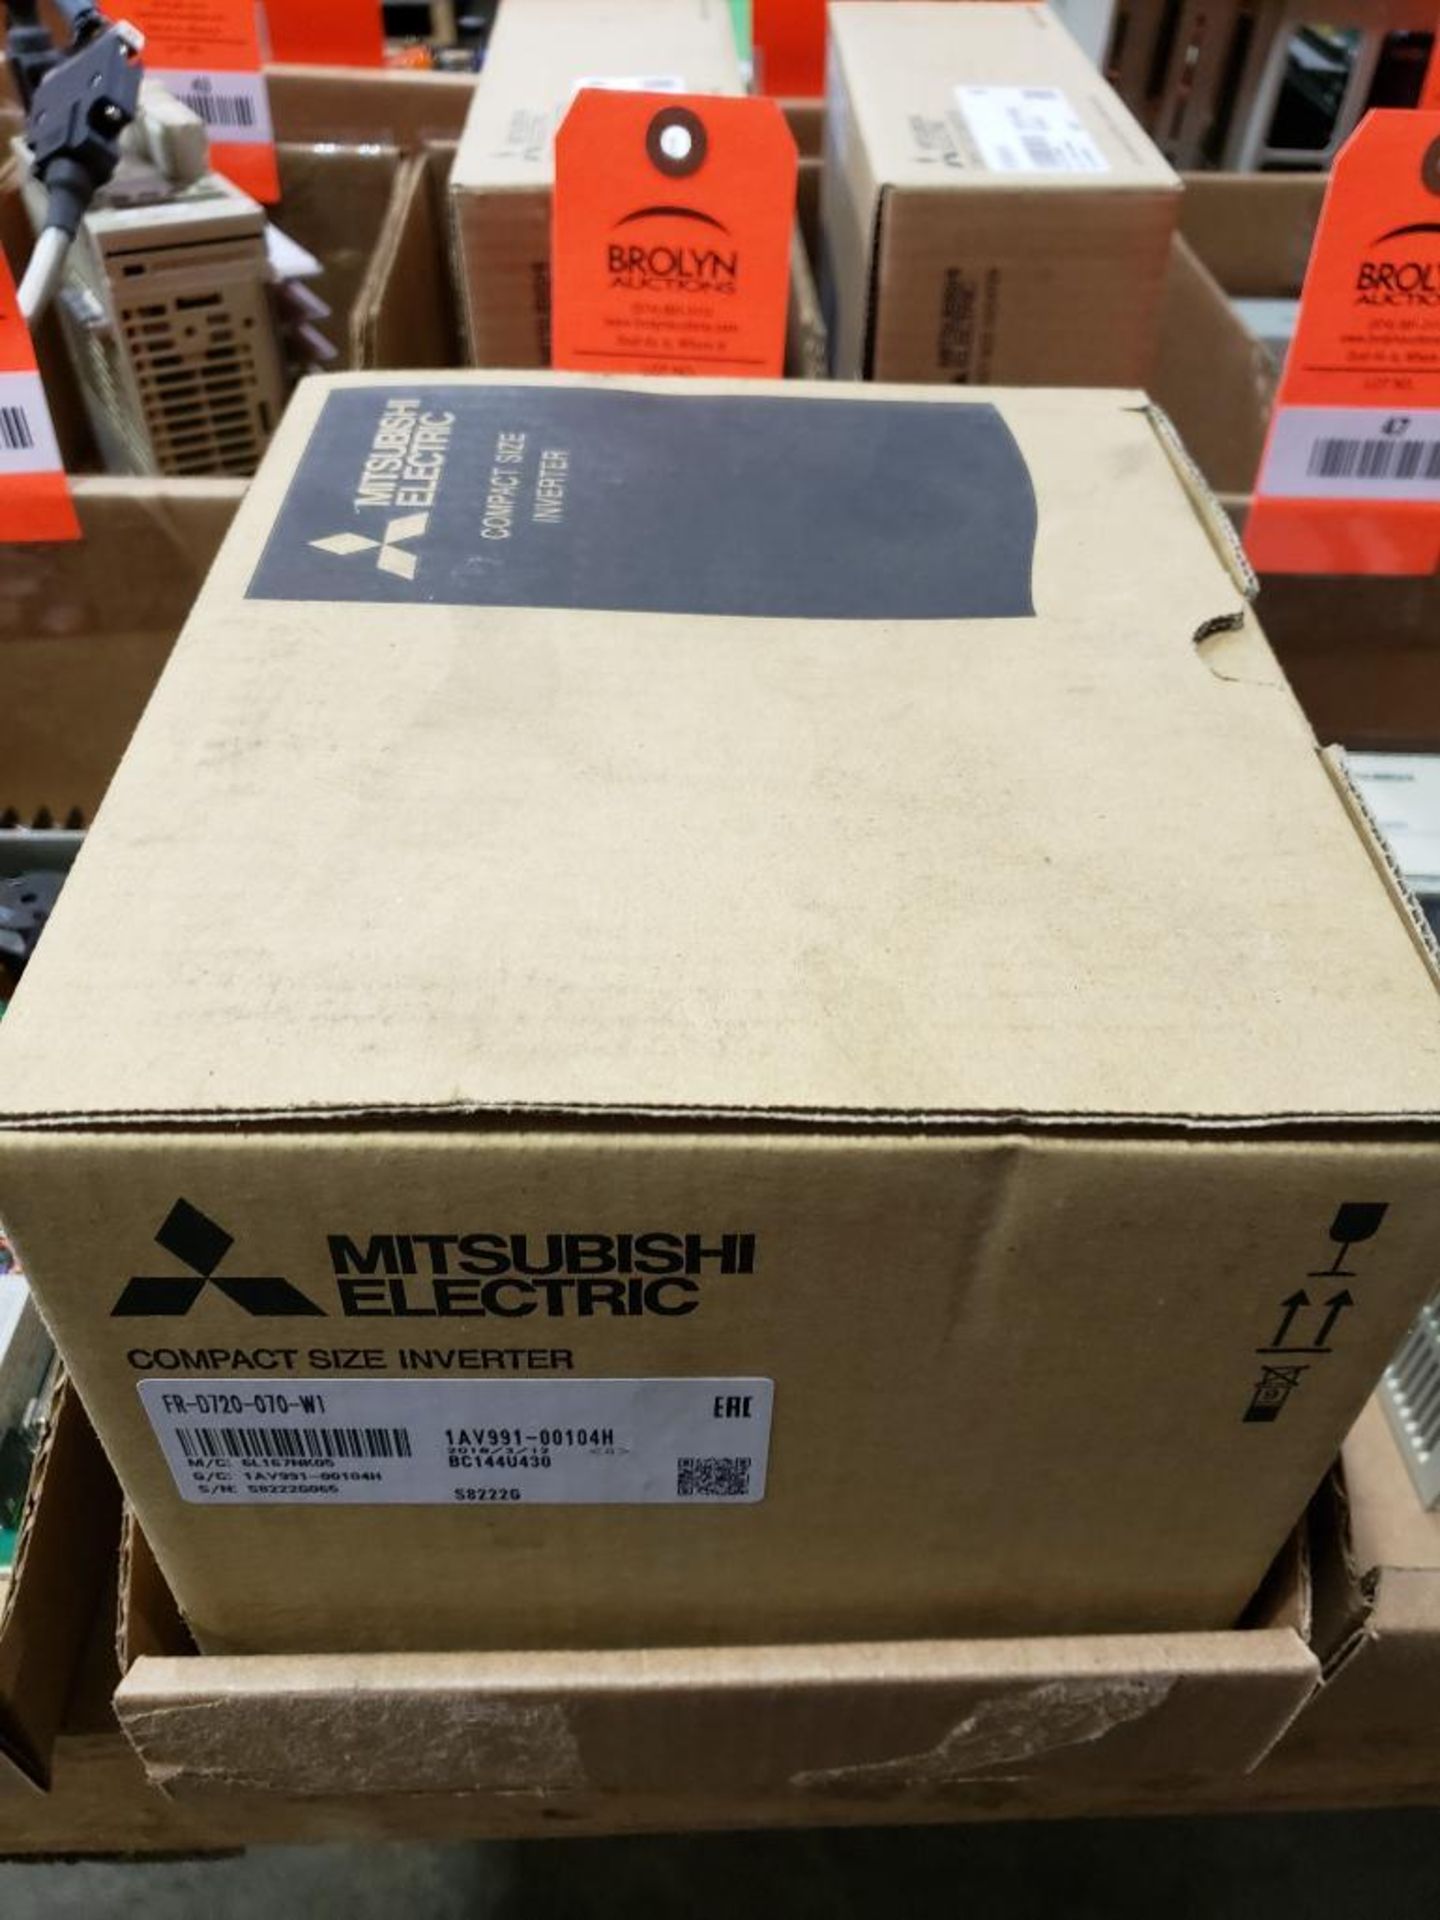 Mitsubishi Electric FR-D720-070-W1 compact size inverter. New in box.